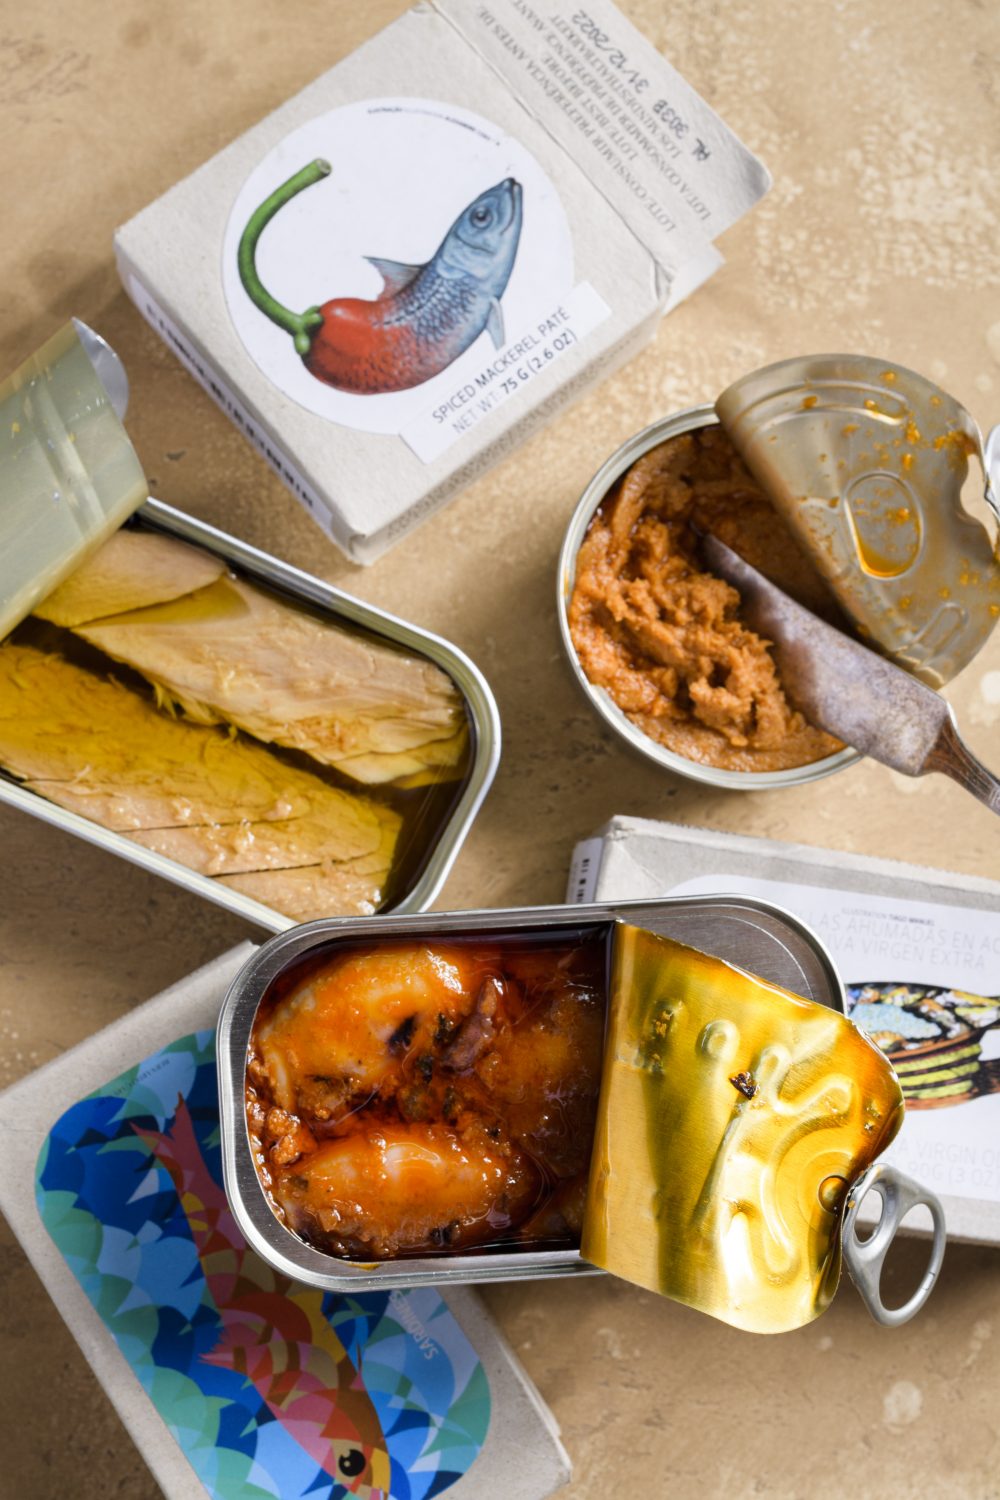 José Gourmet’s artful tins contain boldly flavored seafood.